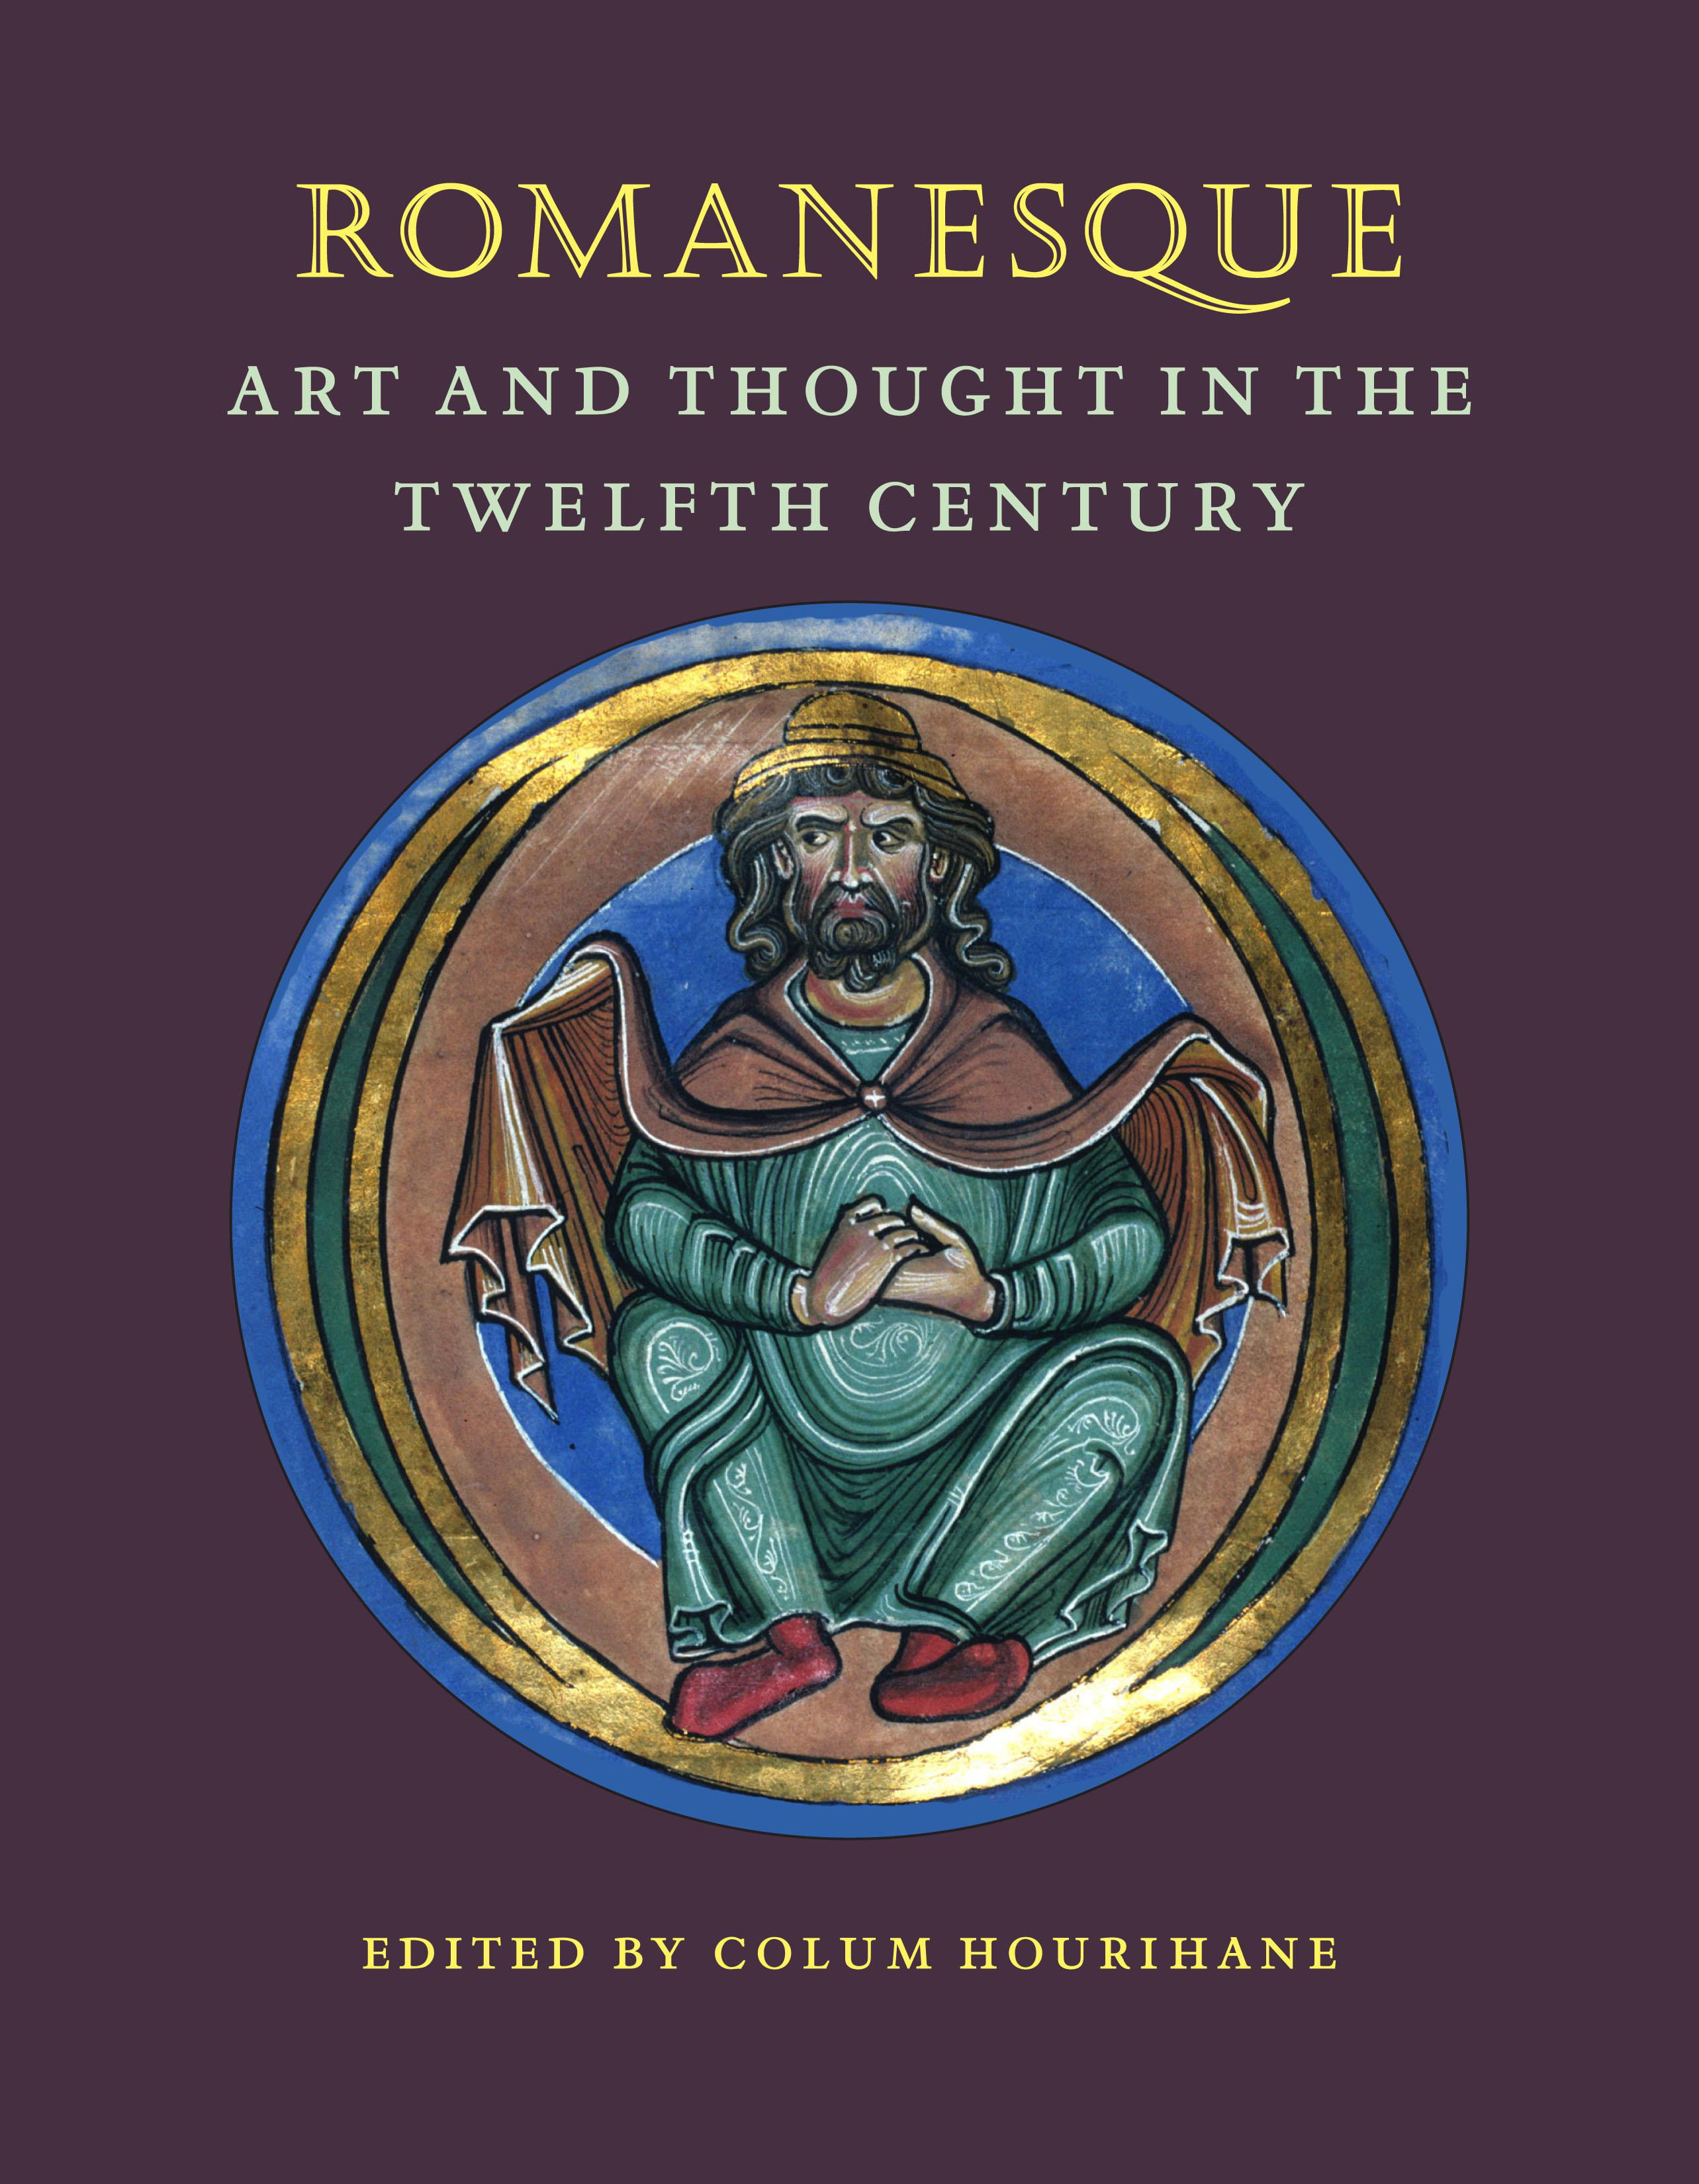 Romanesque-Art-and-Thought-in-the-Twelfth-Century-The-Index-of-Christian-Art